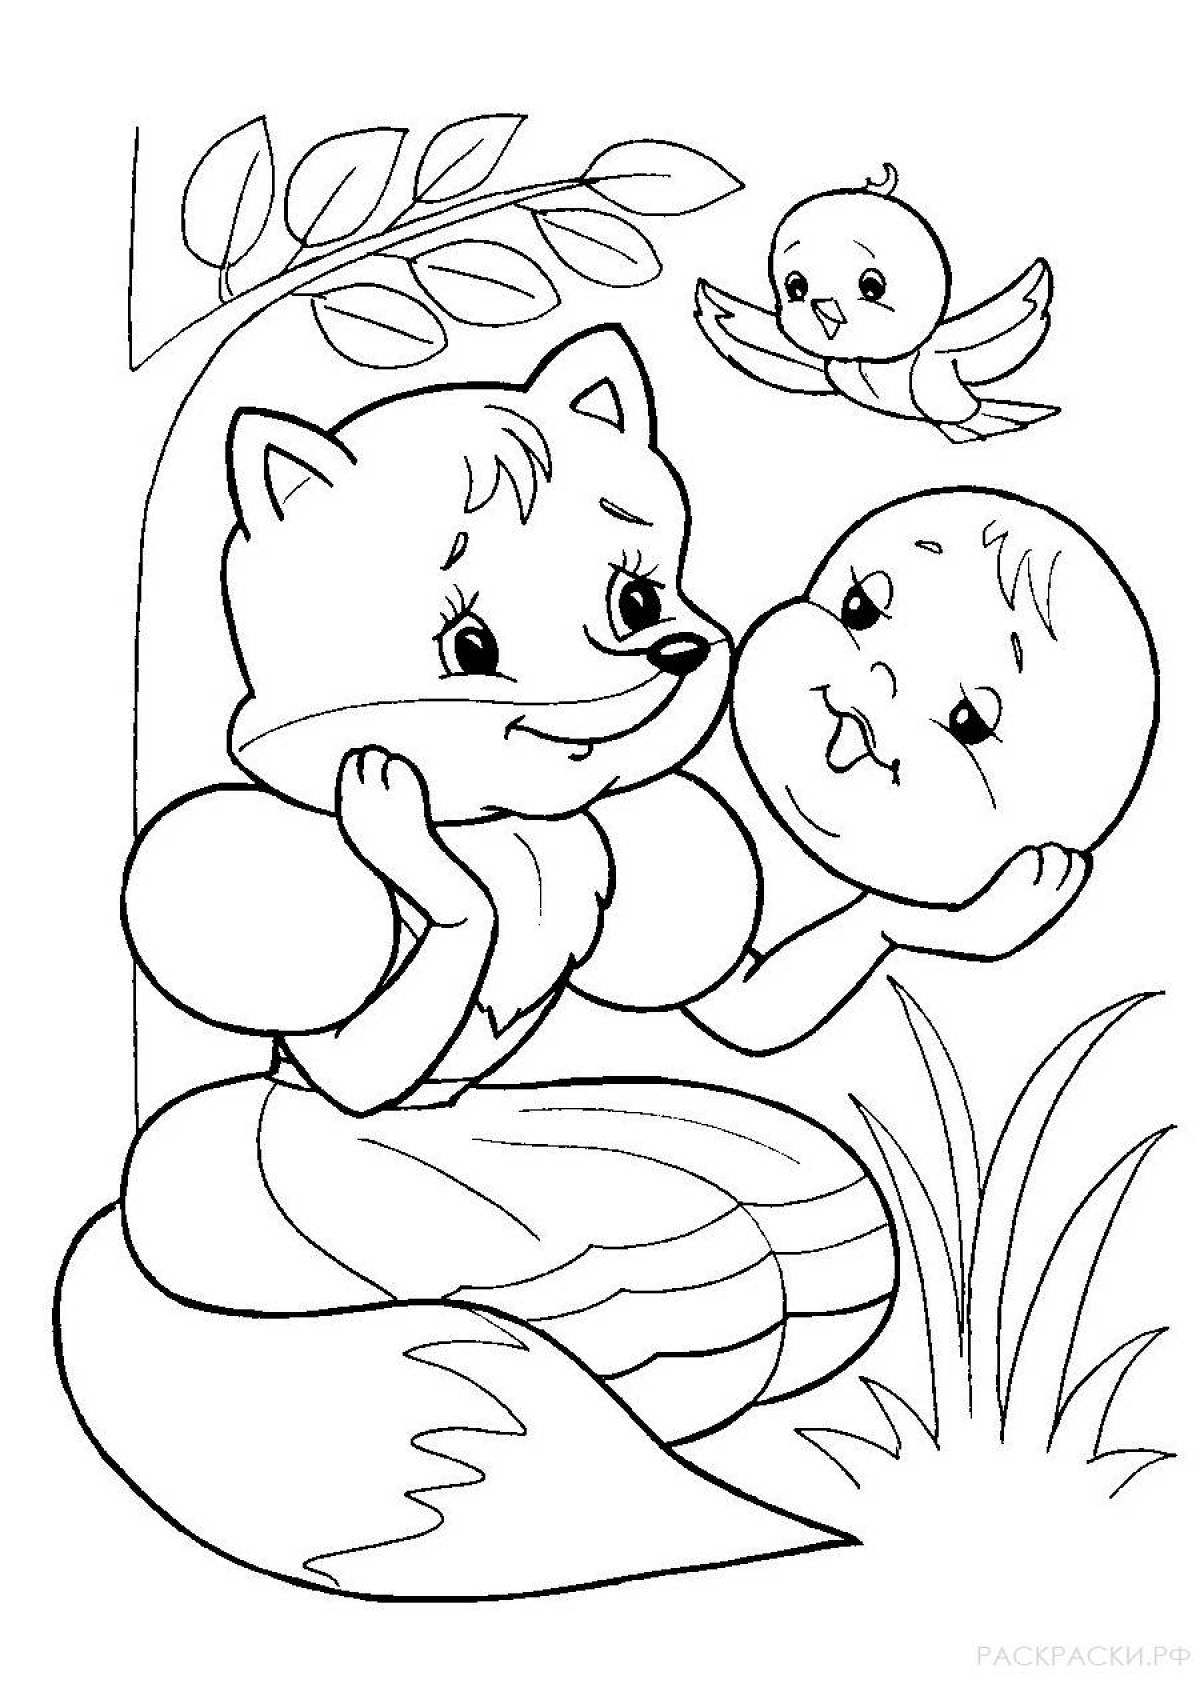 Coloring page adorable gingerbread man for babies